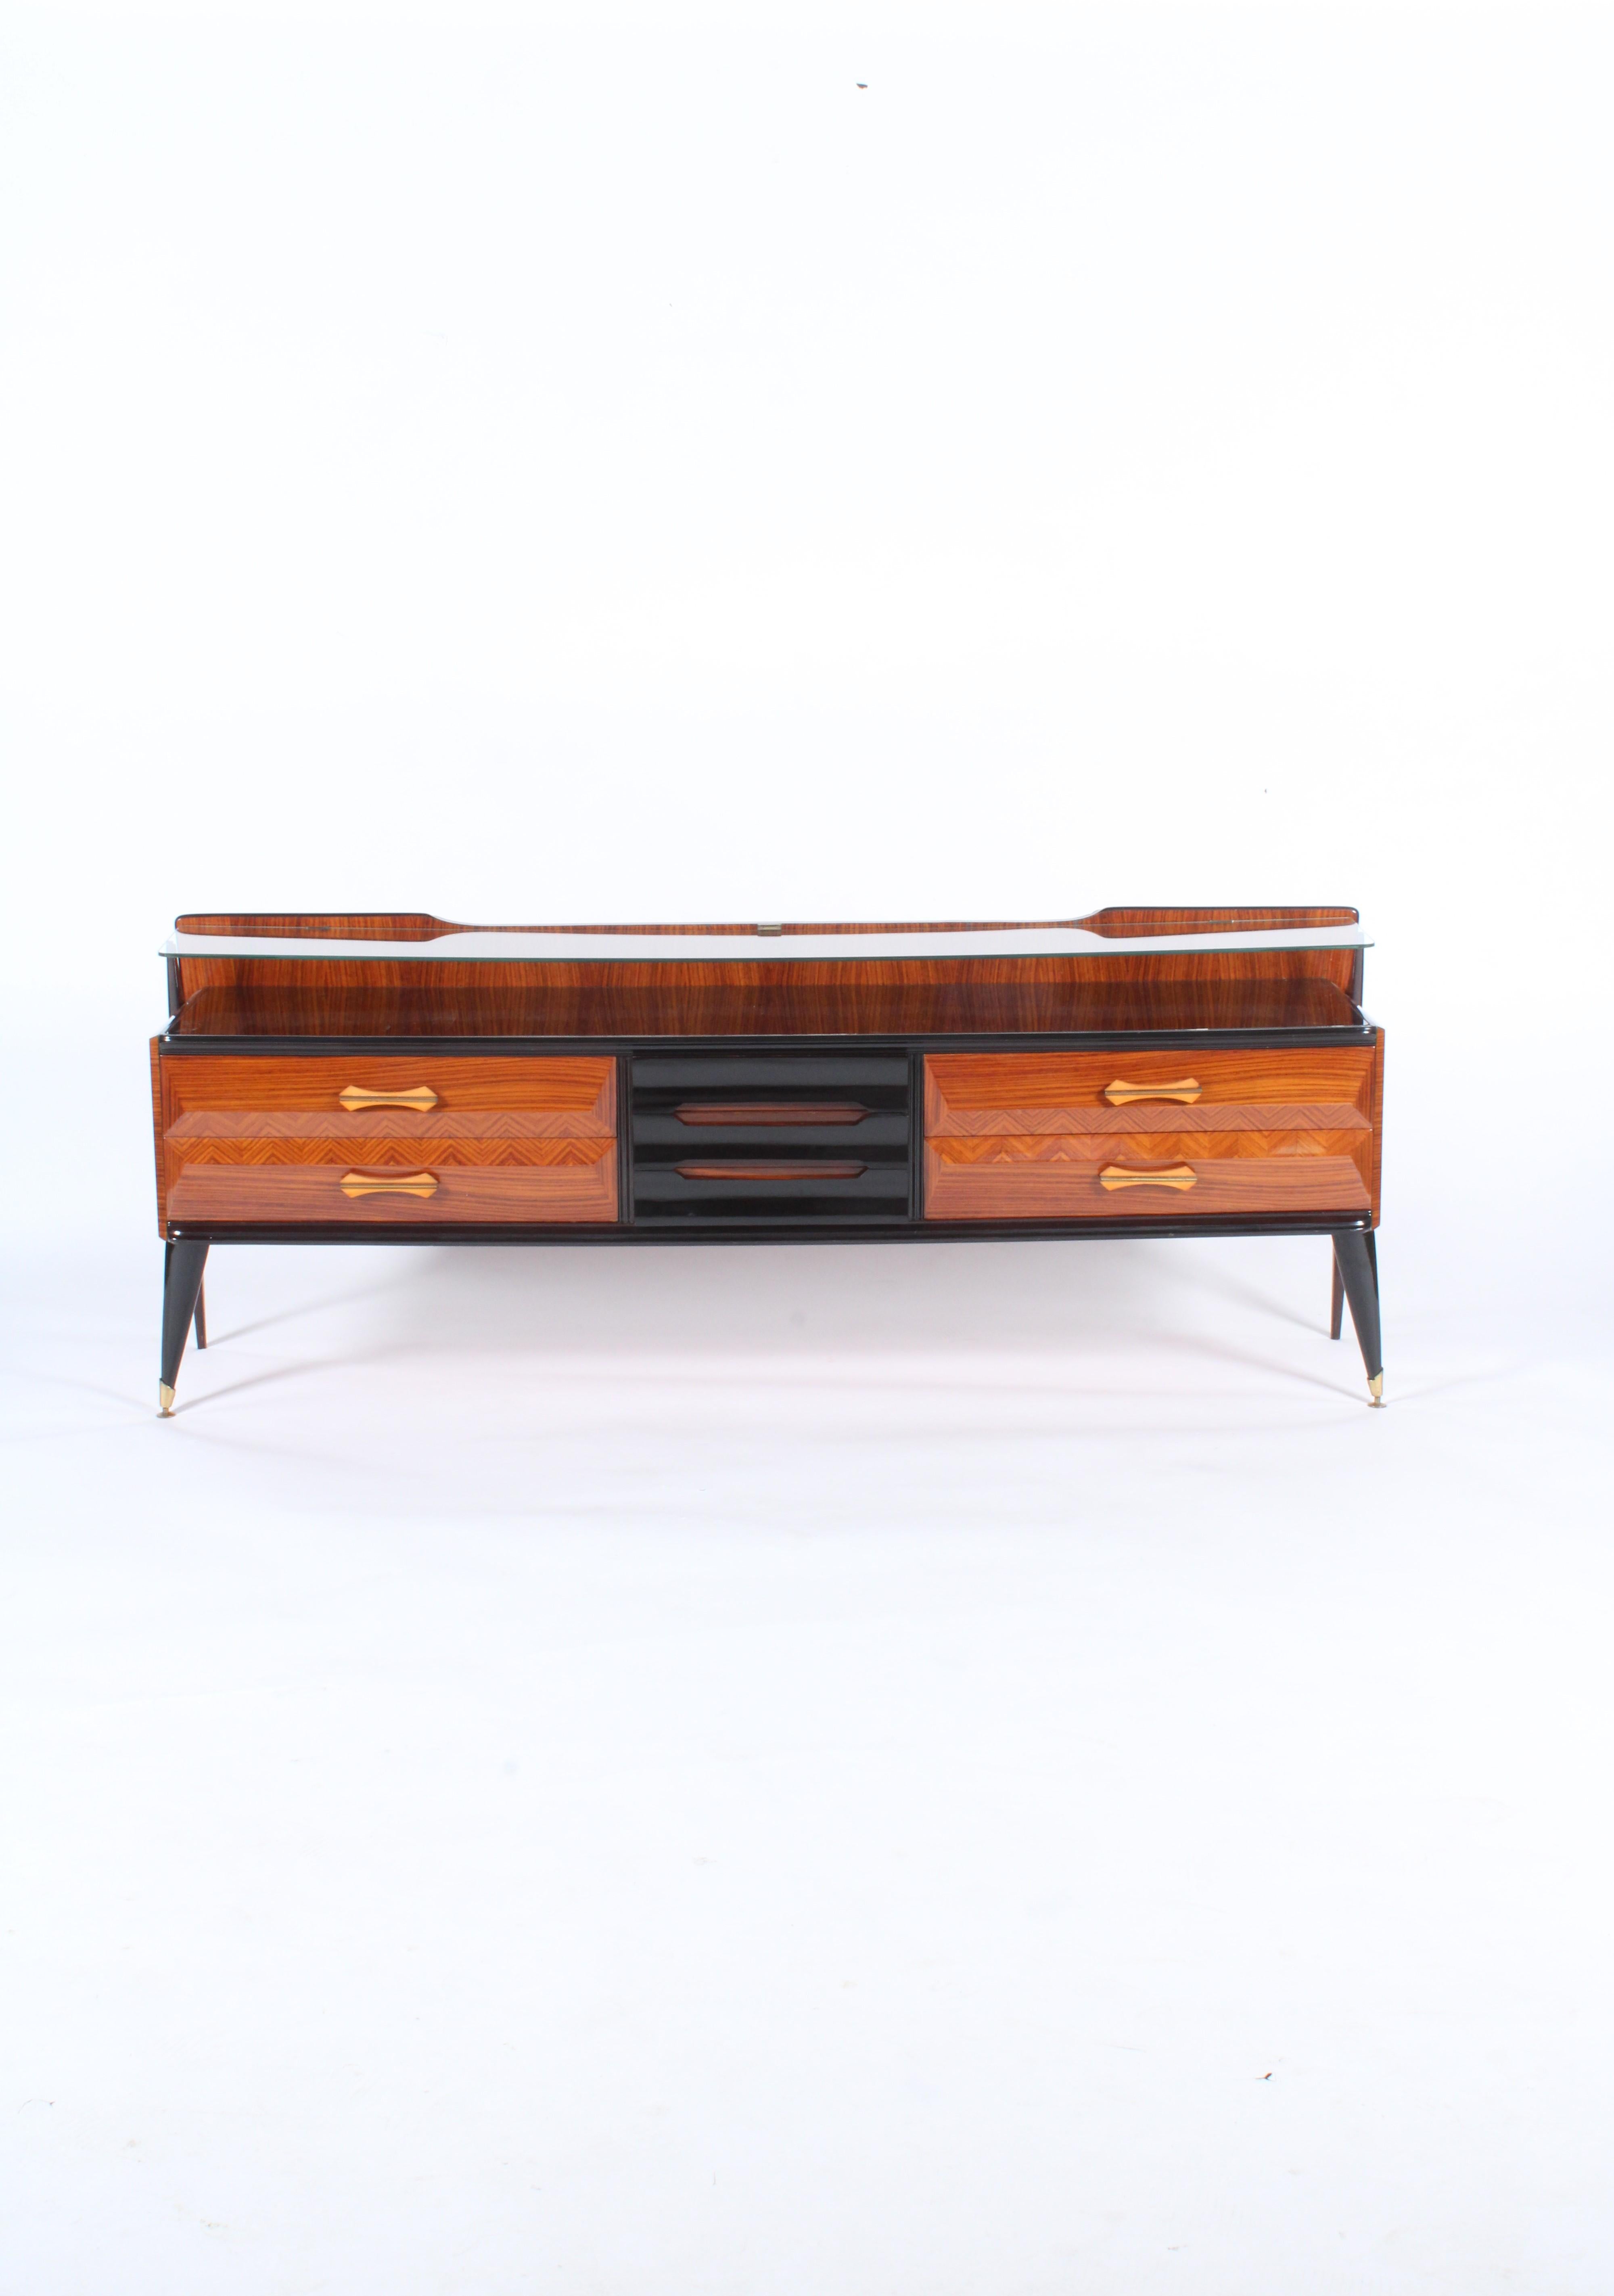 Sleek And Stylish Mid Century Italian Sideboard In Good Condition For Sale In Portlaoise, IE